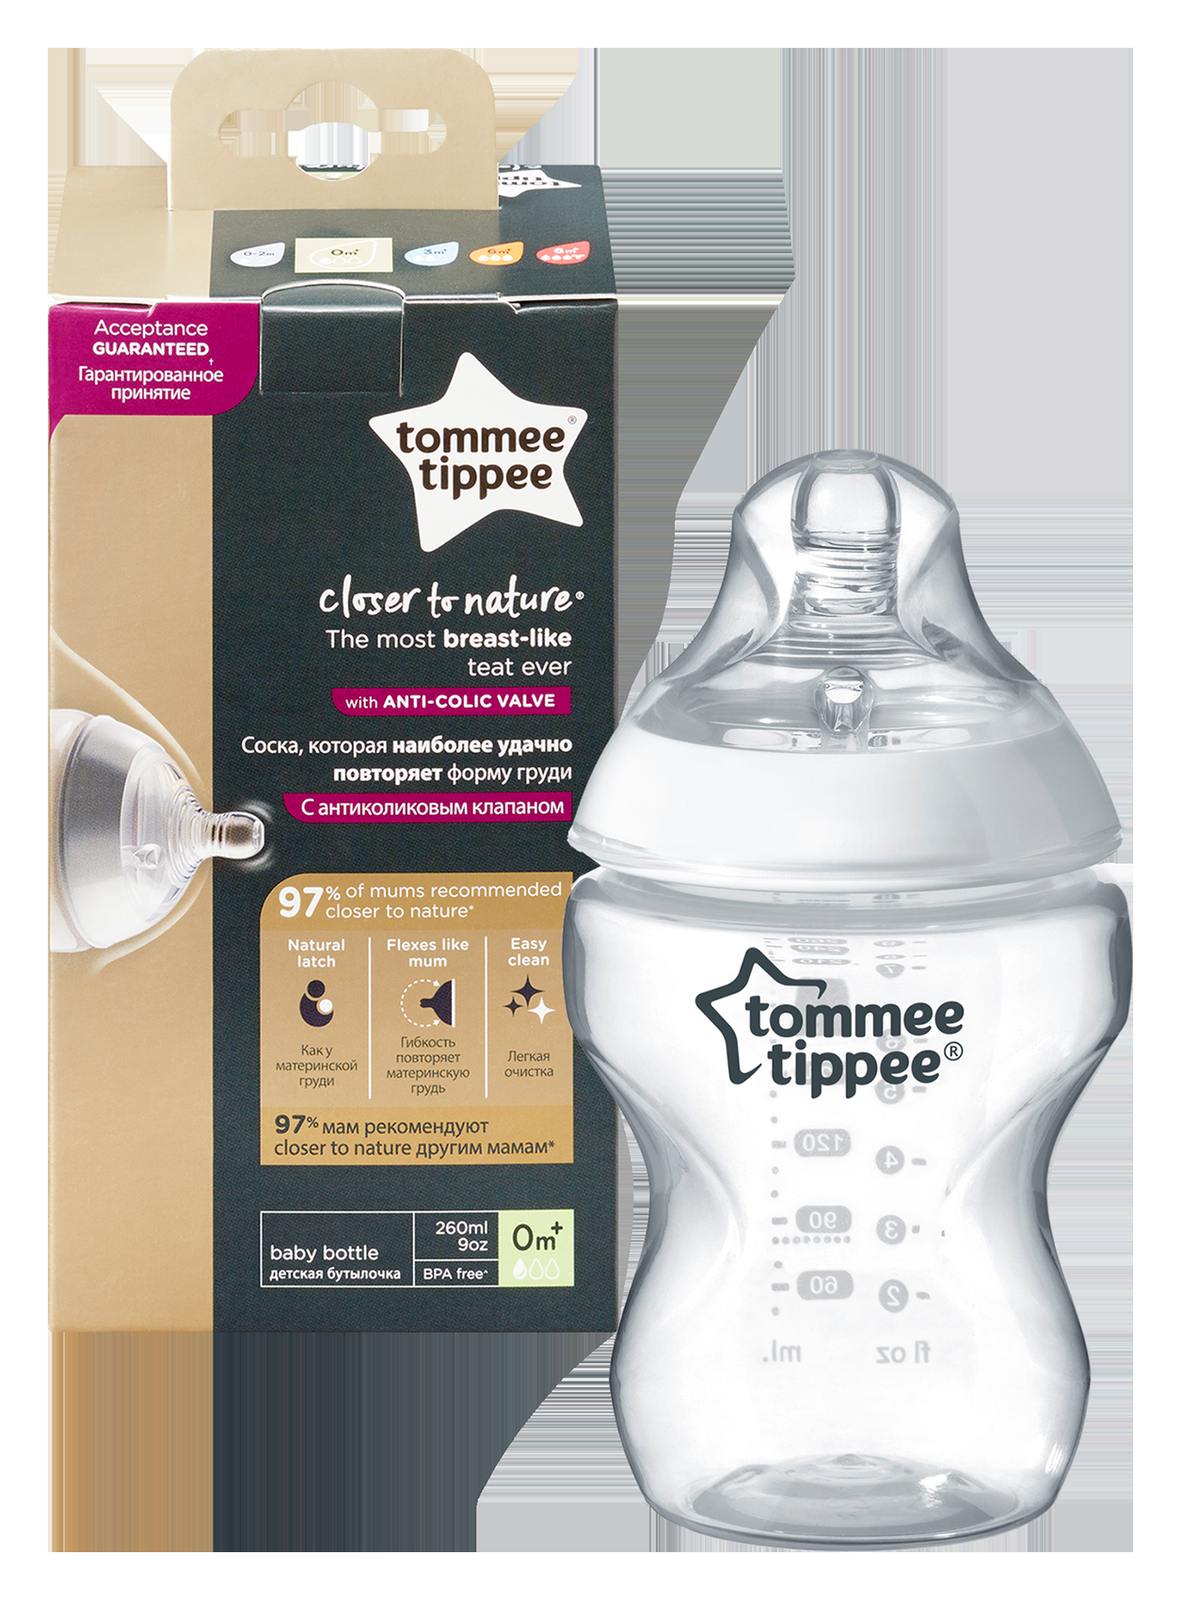 Tommee tippee biberon closer to nature, 260ml - TOMMEE TIPPEE